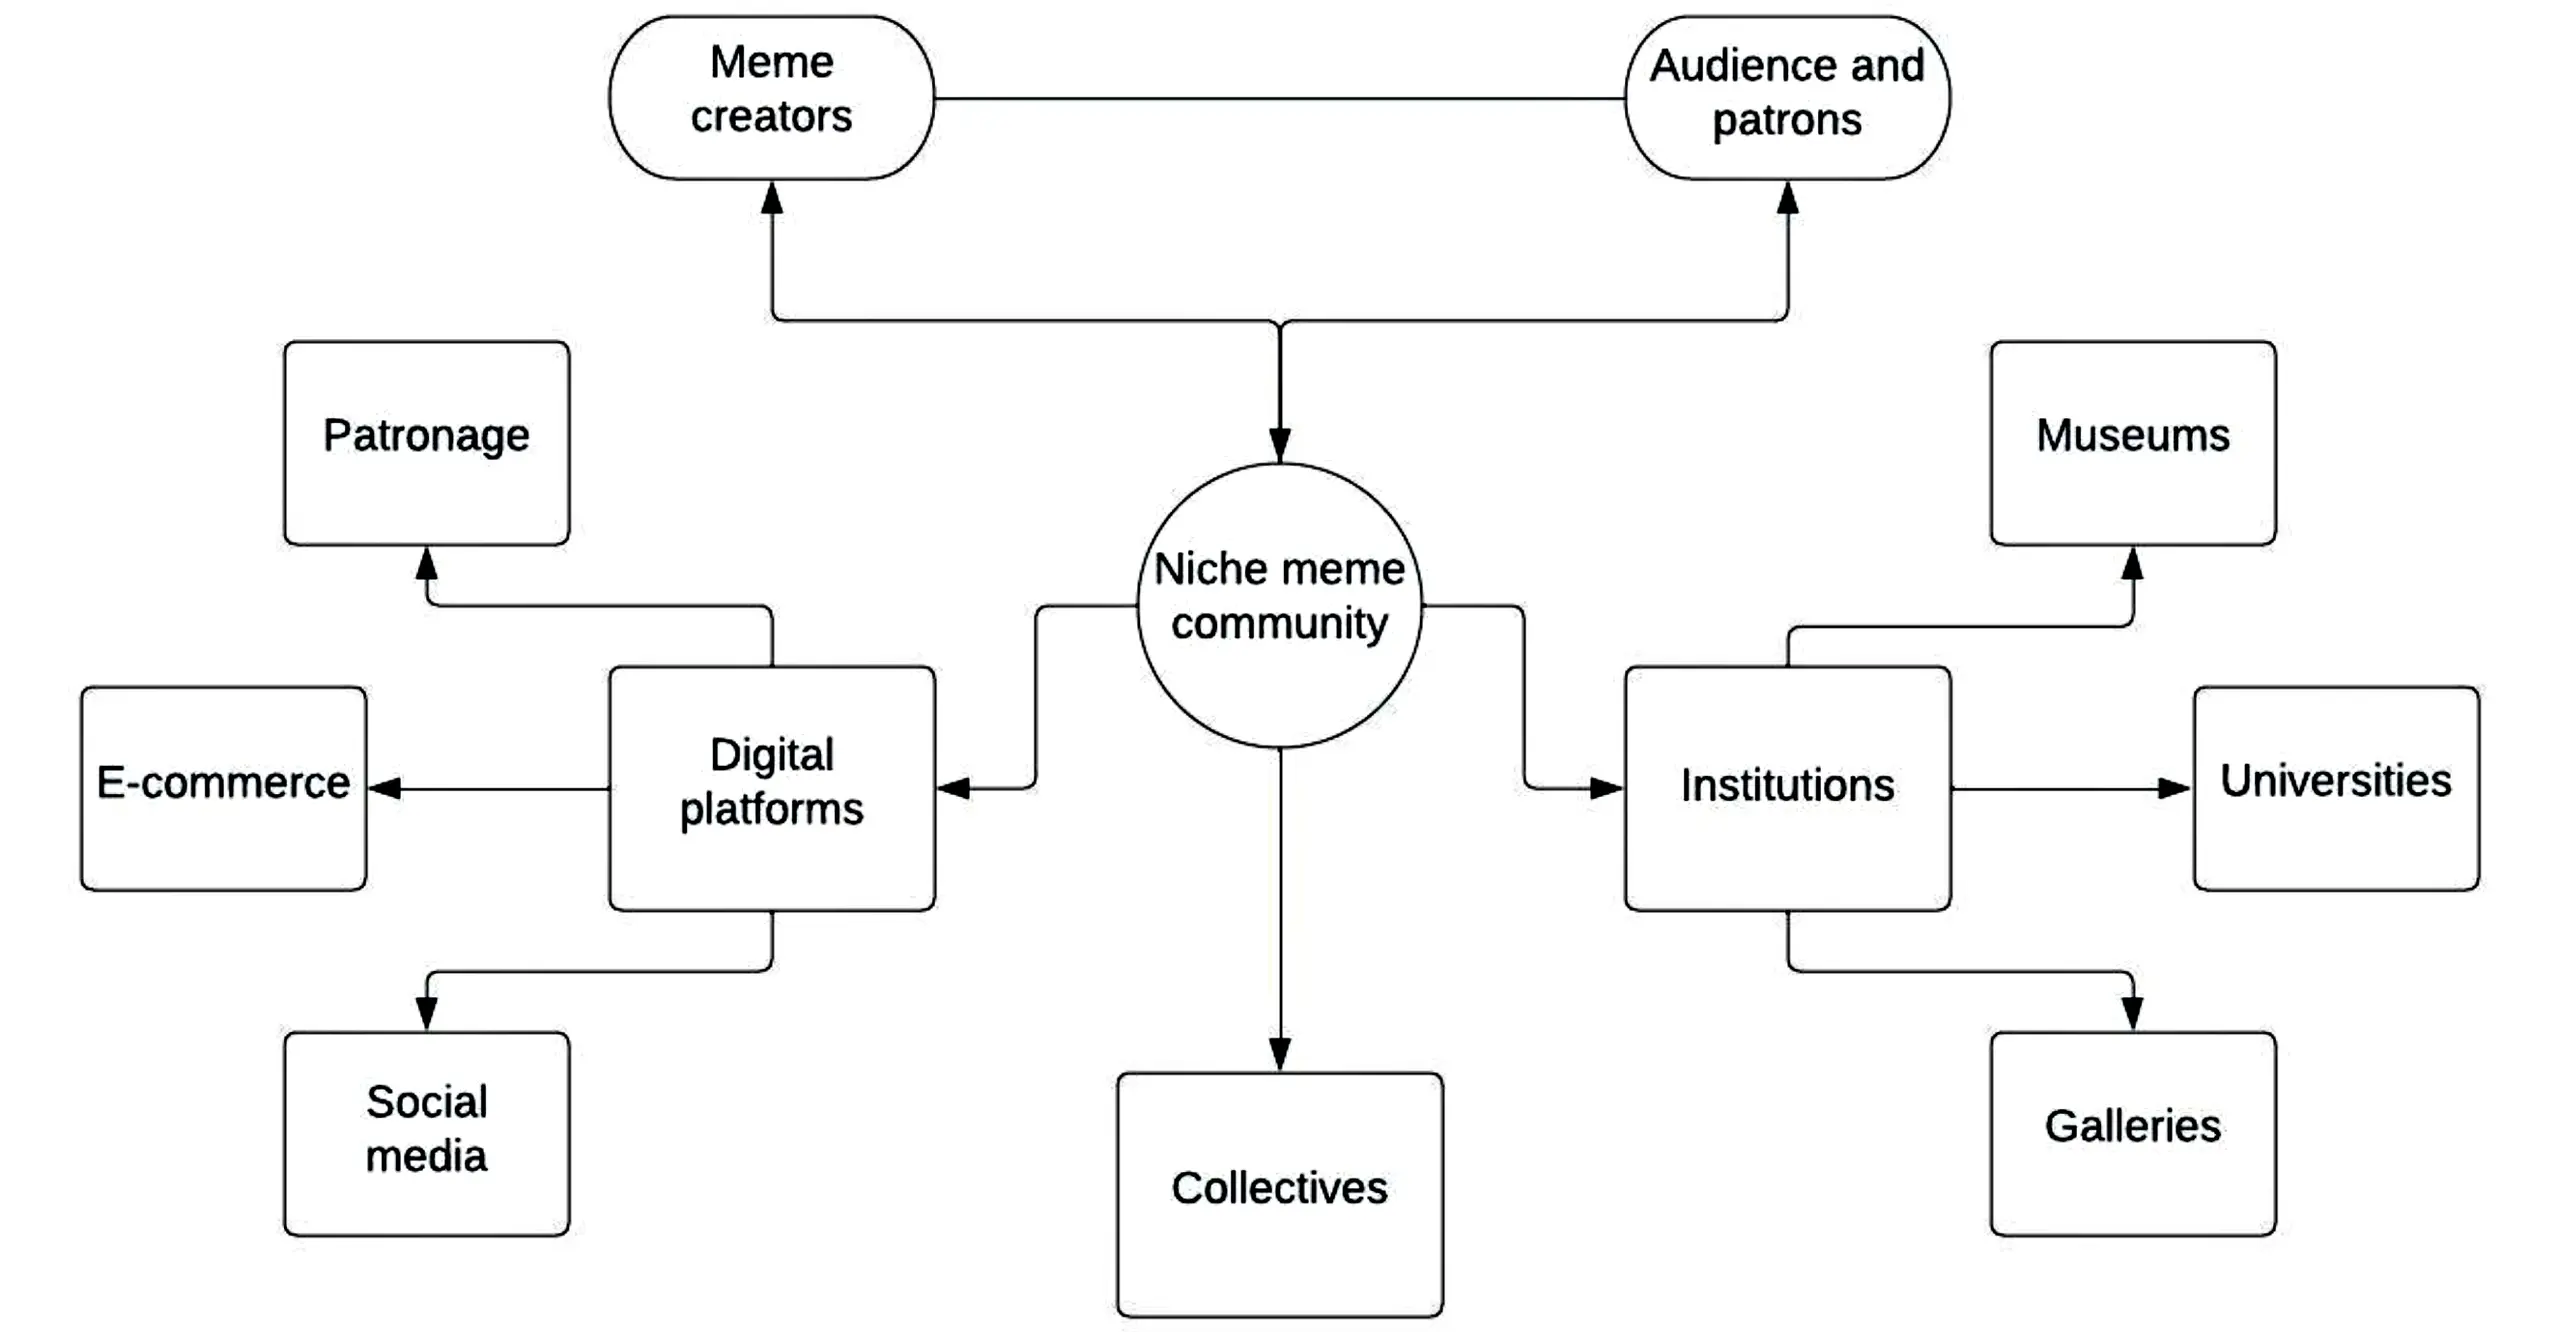 an image of a flow diagram for a research on memes